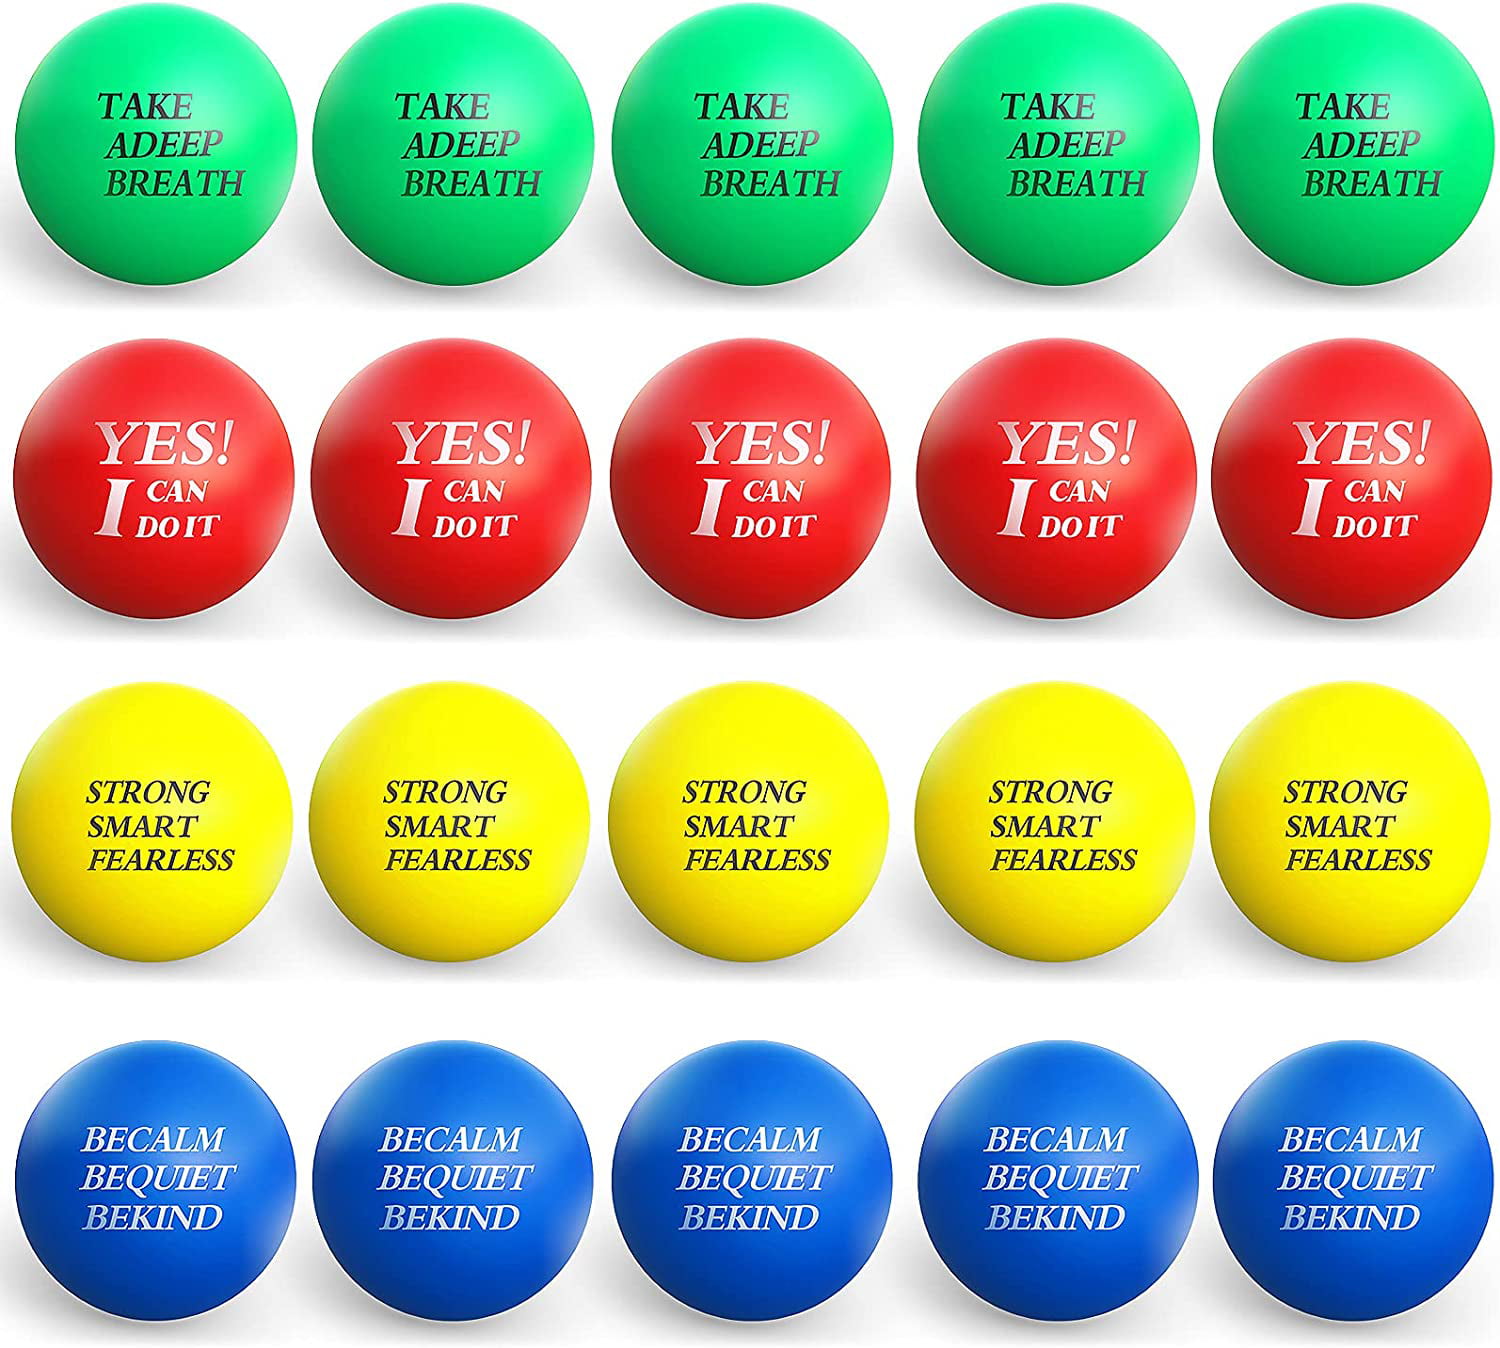 30 Pieces Motivational Stress Balls Colorful Foam Balls Inspirational Stress Relief Balls Quotes Stress Ball Pack Small Anxiety Balls for Relief Motivating Encouraging Adults 